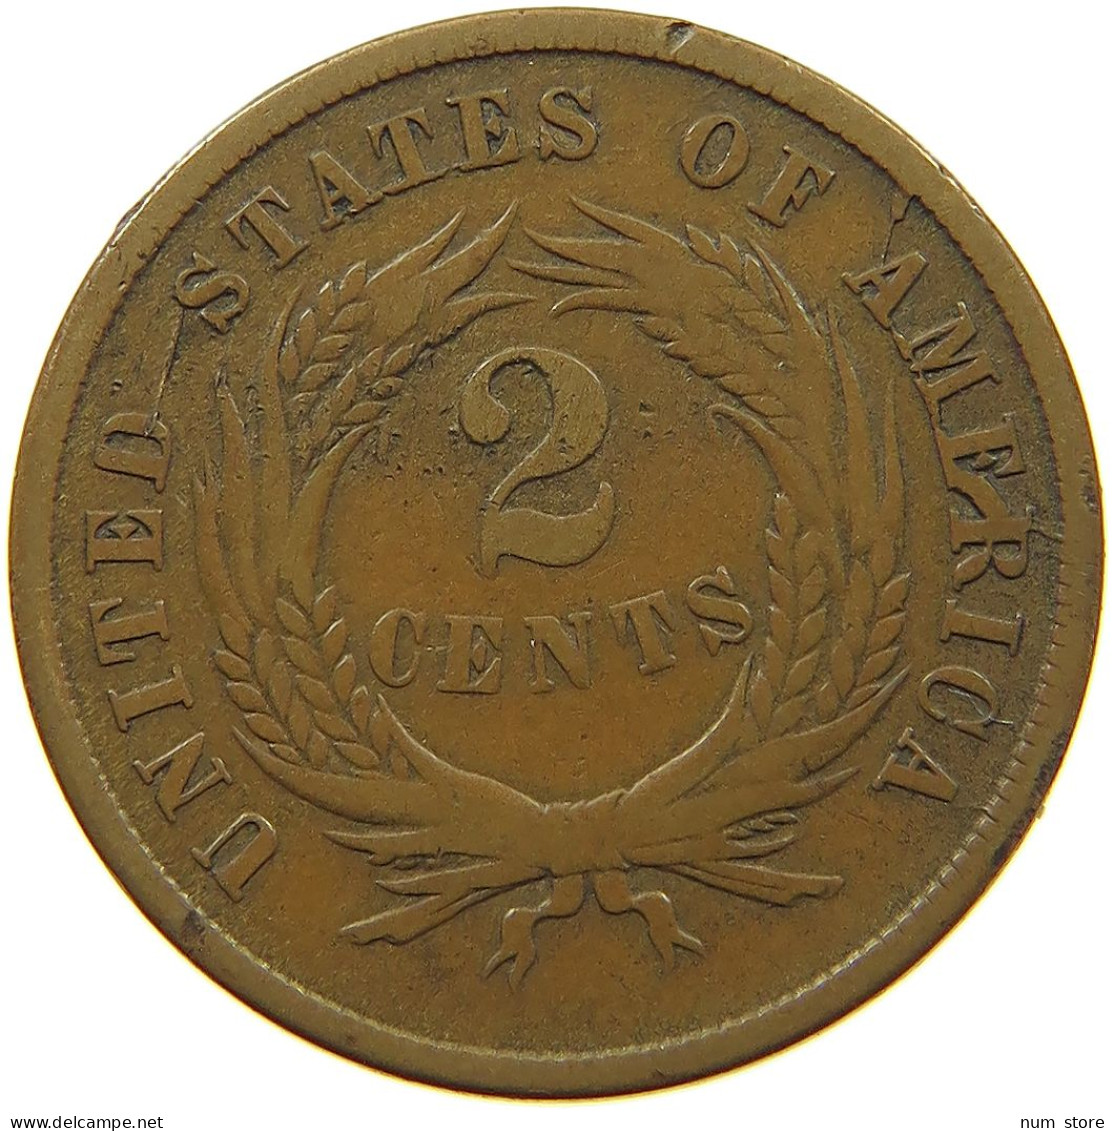 UNITED STATES OF AMERICA 2 CENTS 1865  #c010 0121 - 2, 3 & 20 Cents